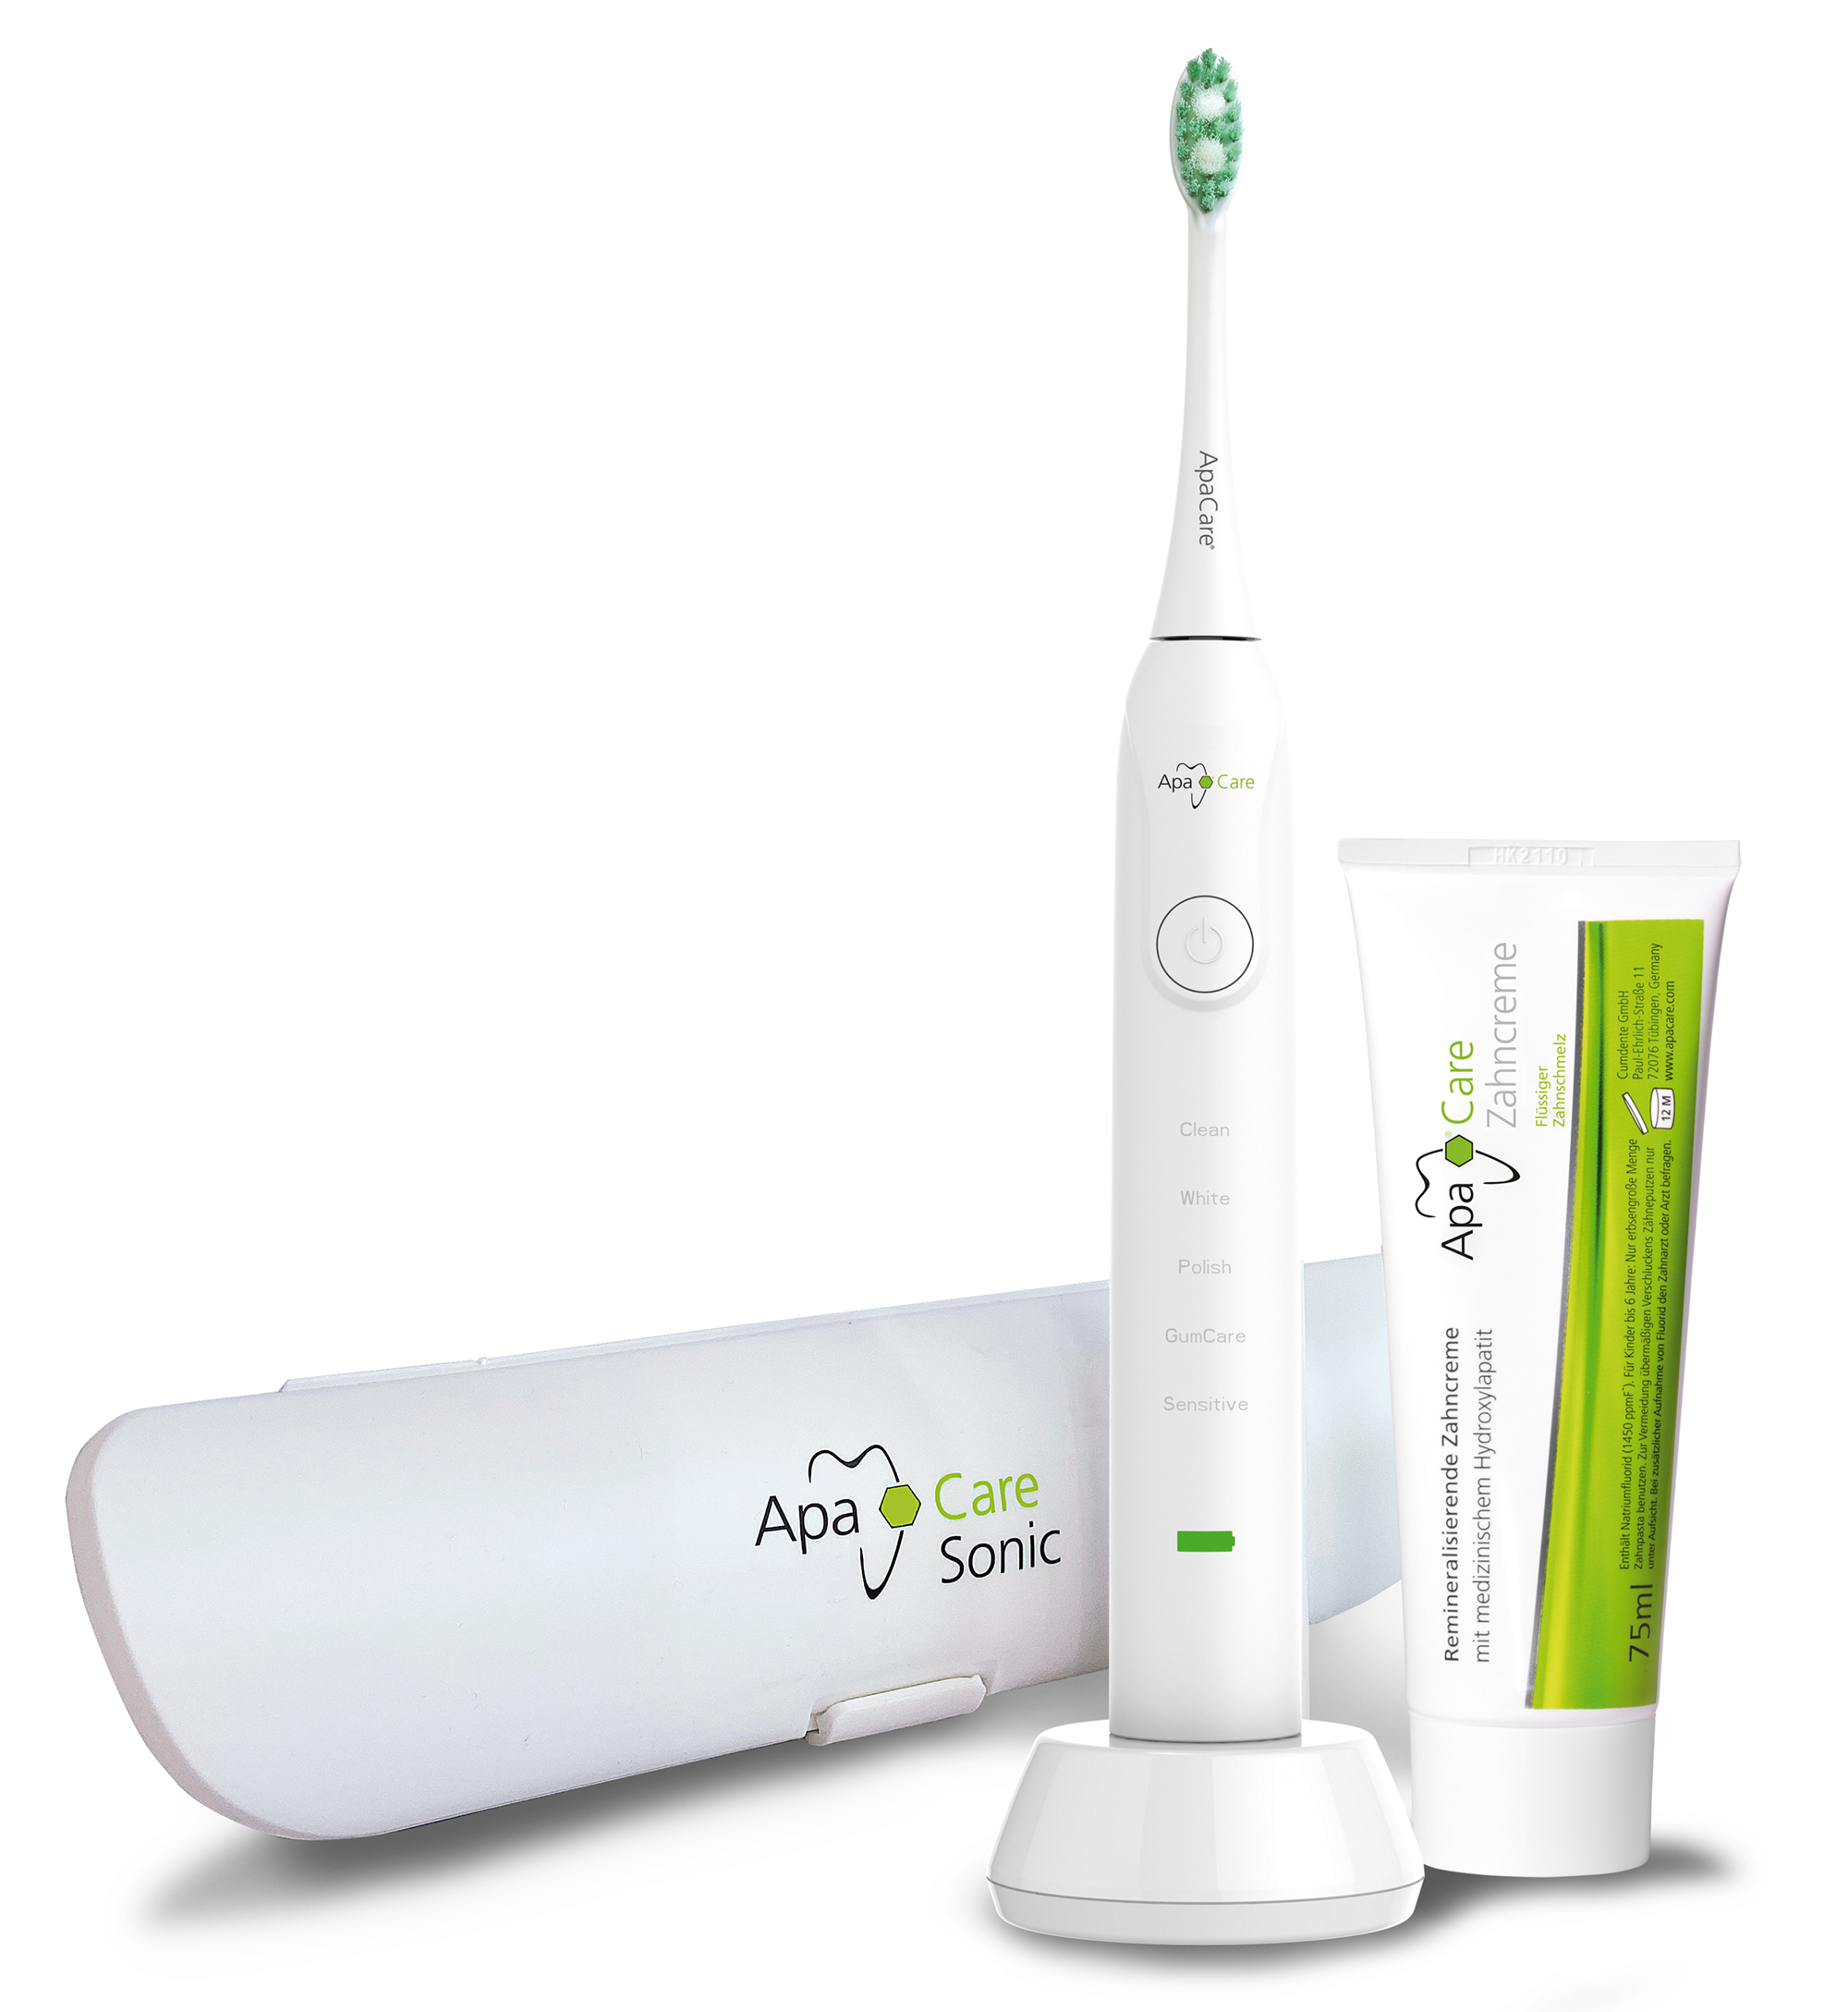 Travel - Sonic Professional Toothbrush and travel case incl. one ApaCare toothpaste